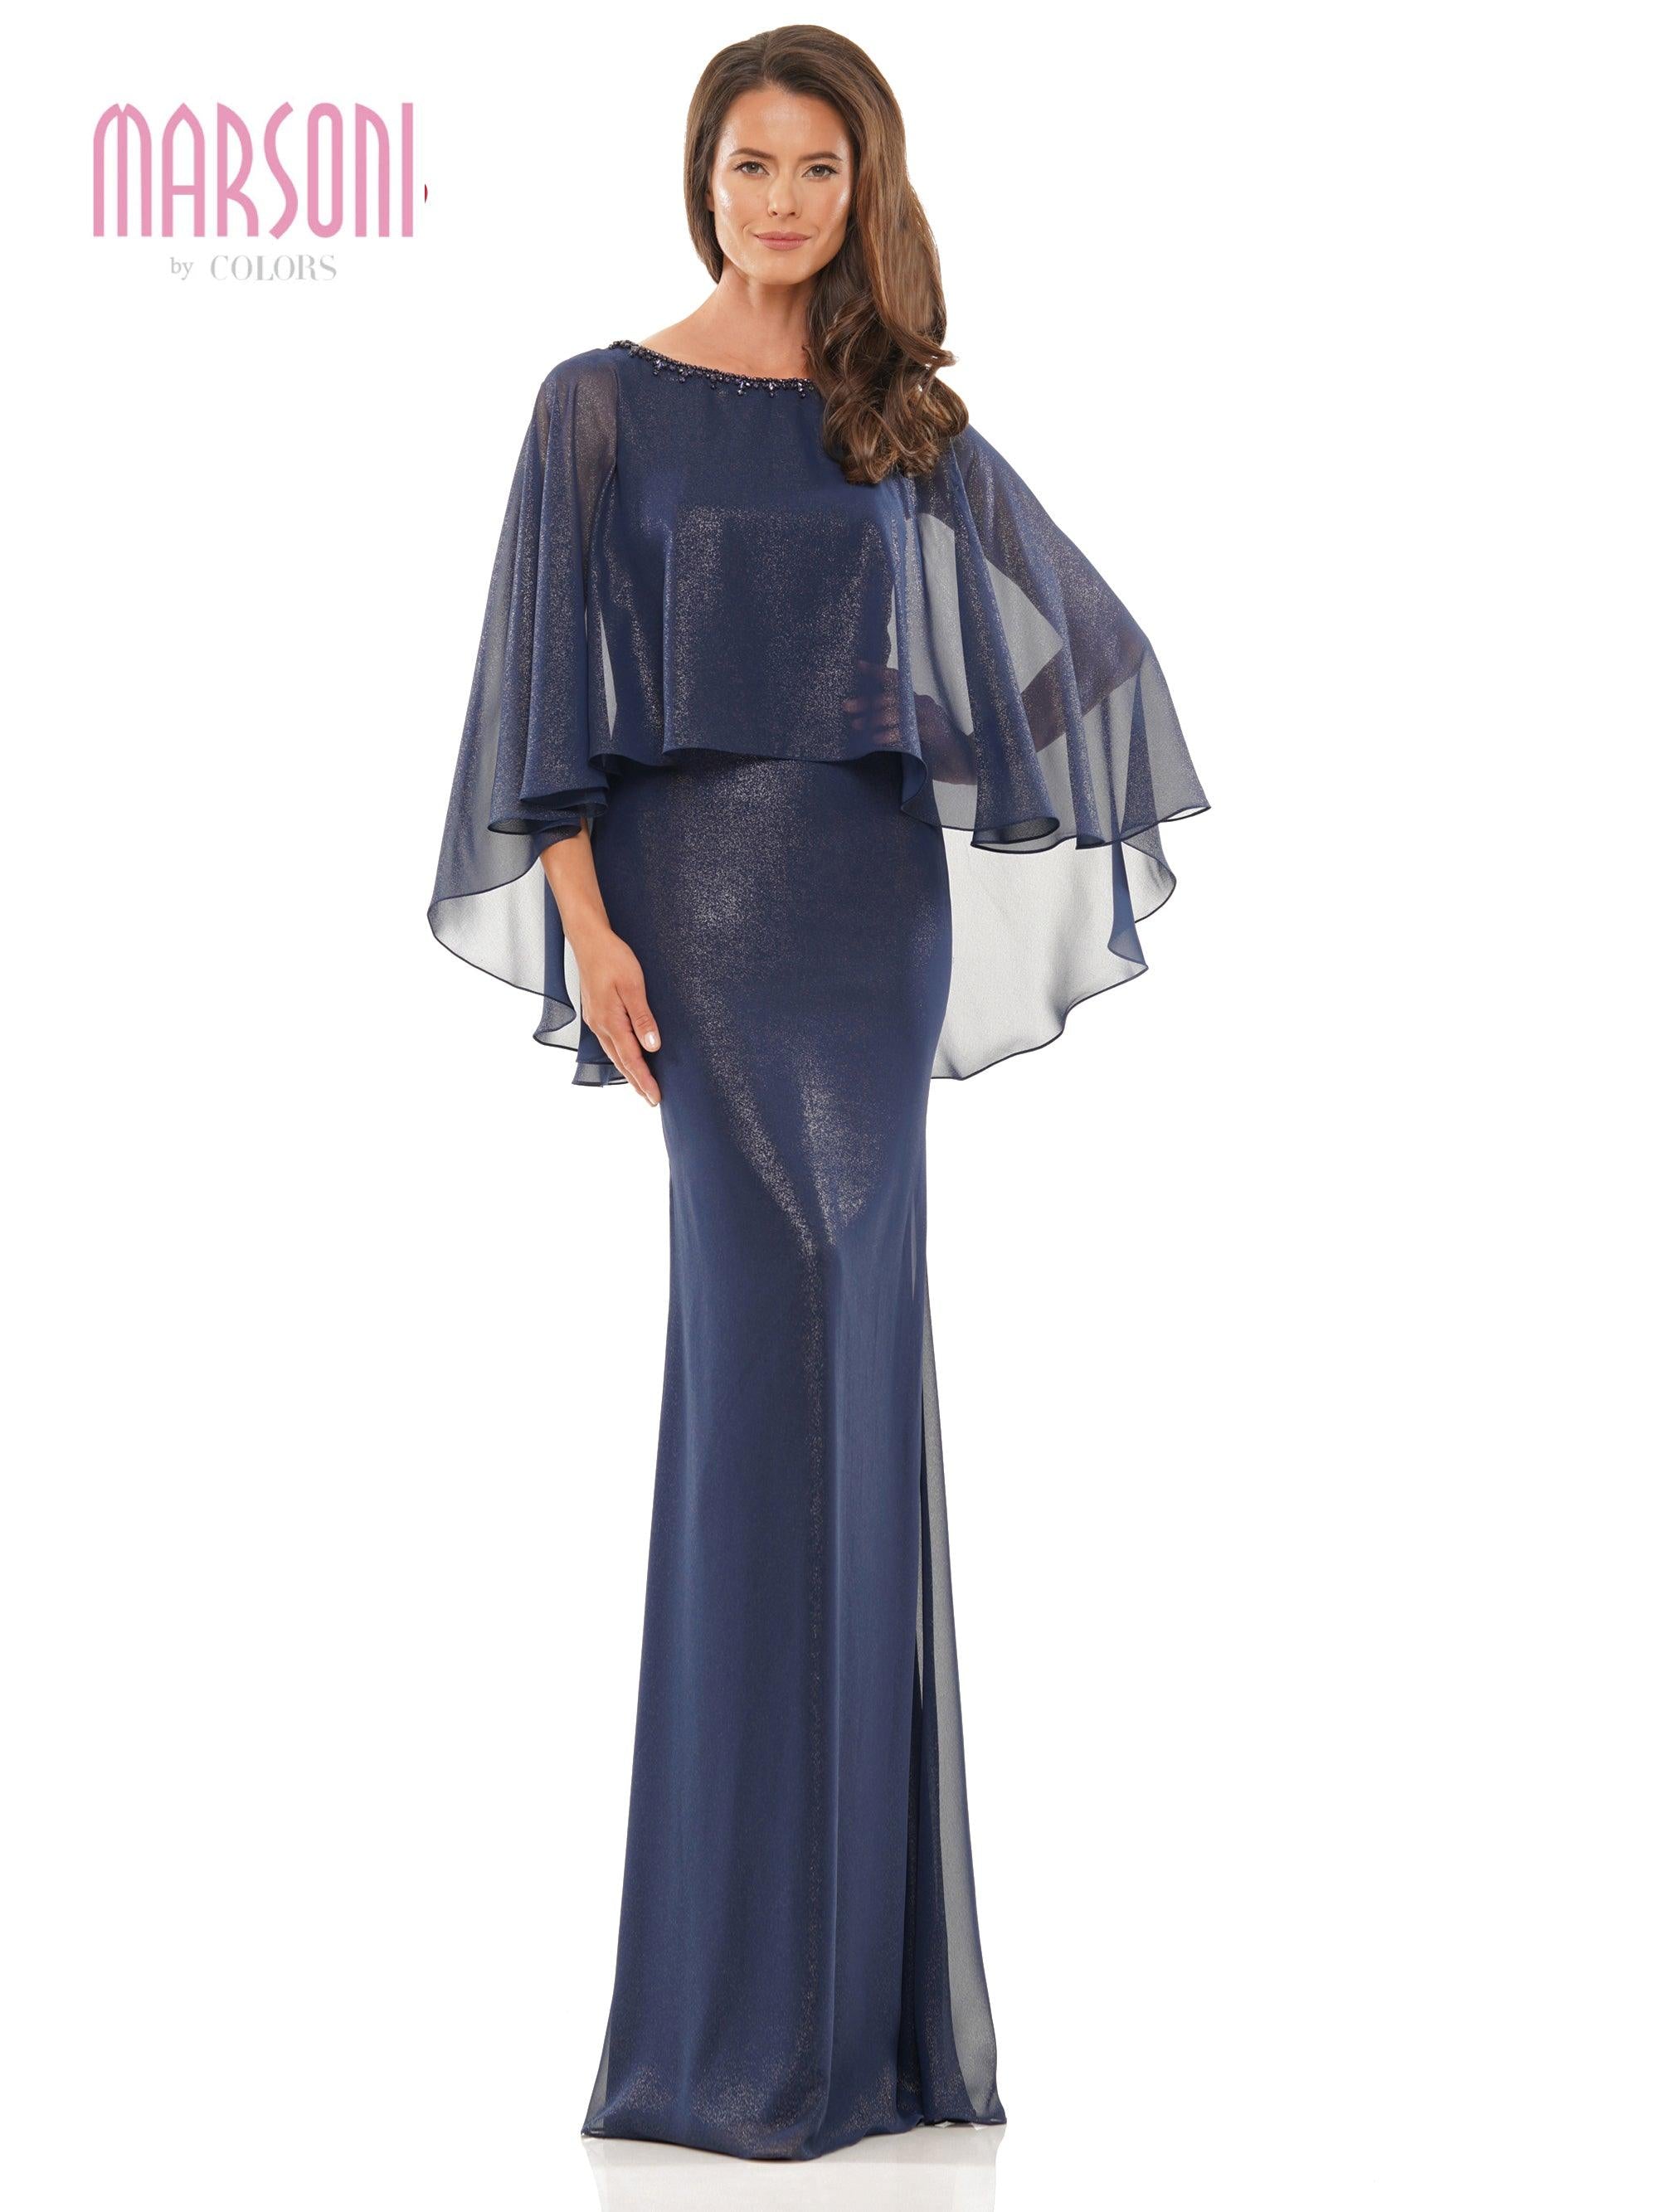 Marsoni Long Mother of the Bride Cape Dress 1188 - The Dress Outlet